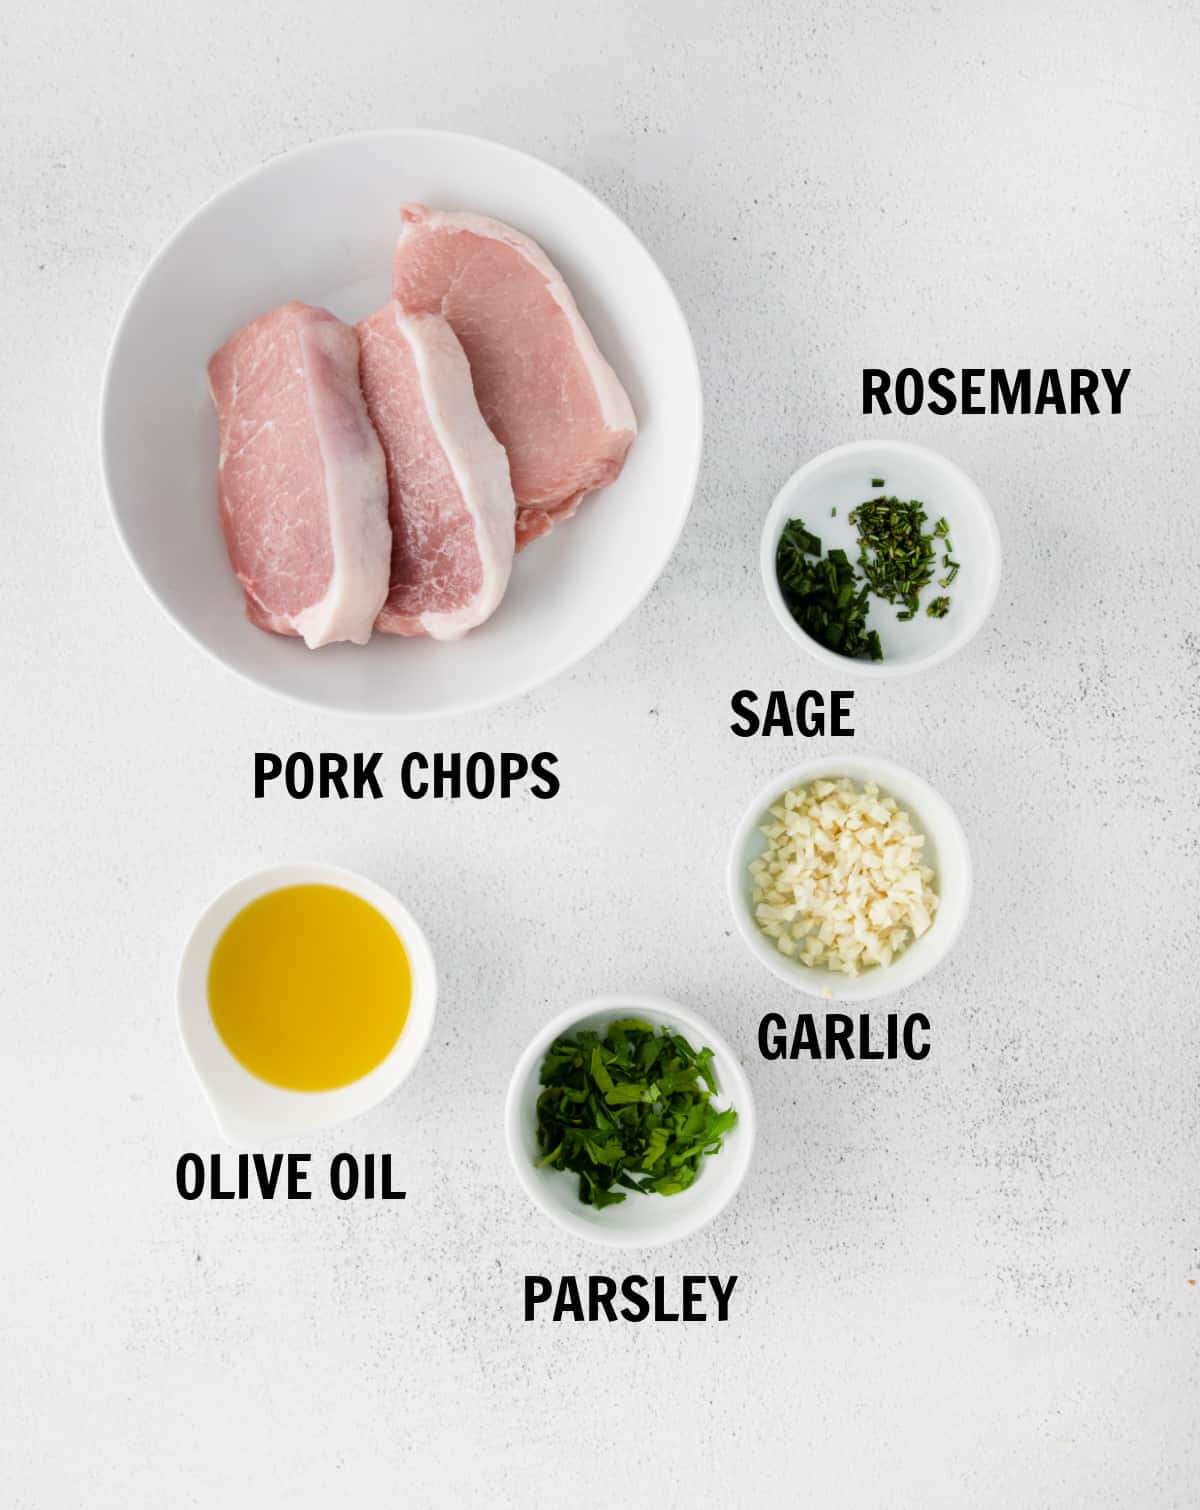 all of the ingredients for bonless pork chops on a white tabletop